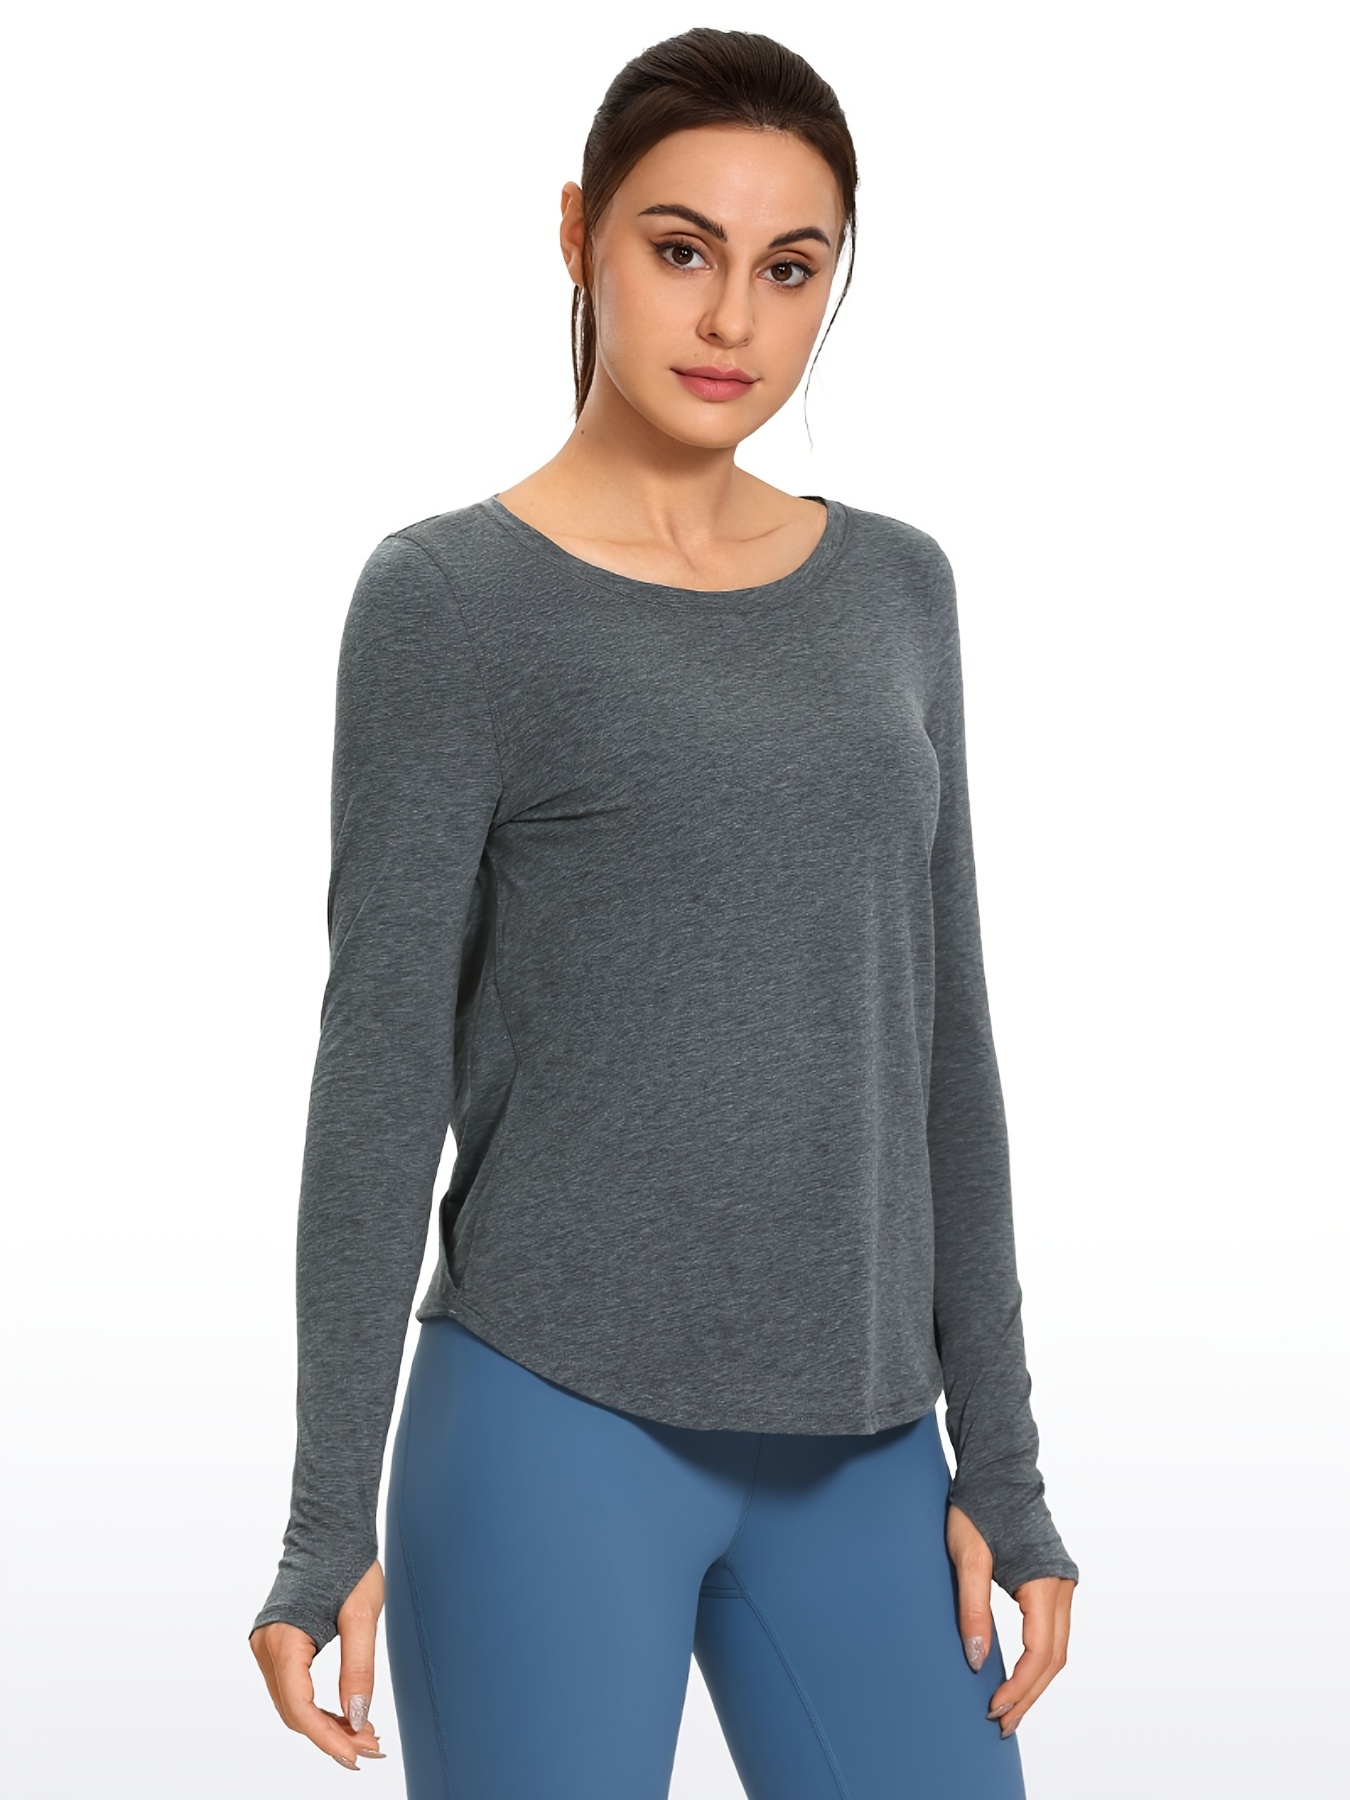 Buy Long Sleeves Yoga Tops For Women Backless Sports T-shirts Gym